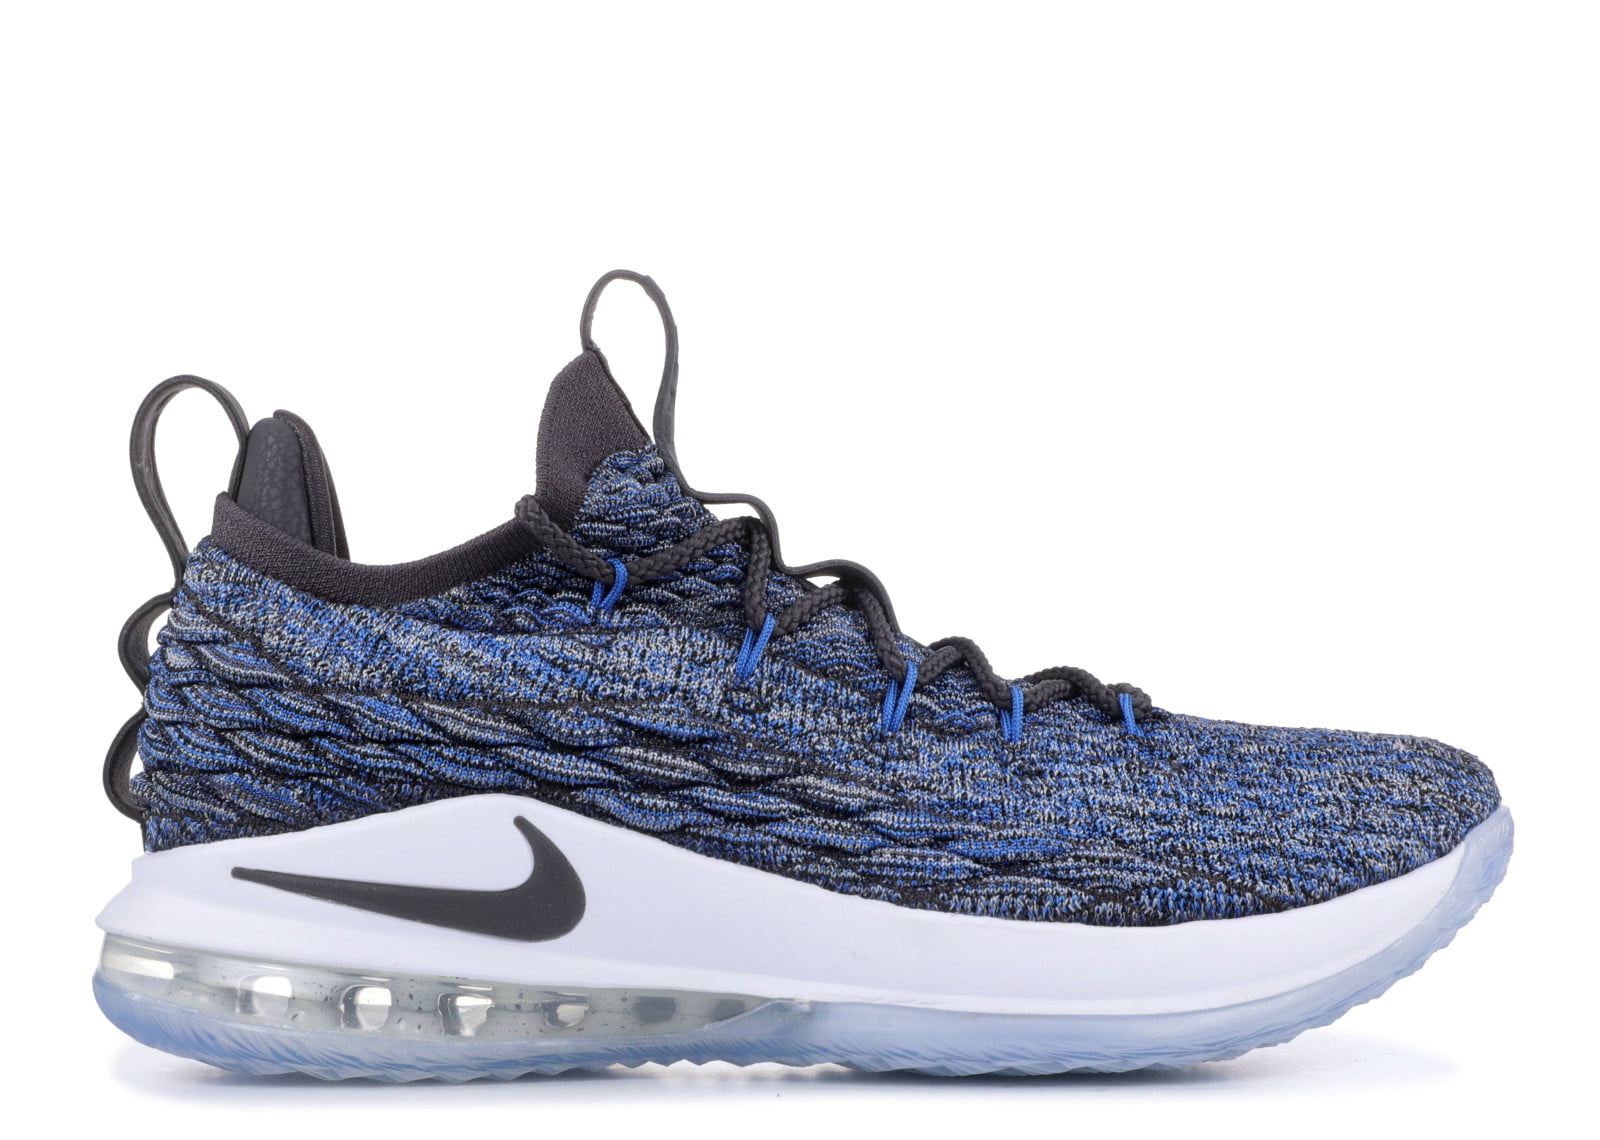 lebron 15 low weight